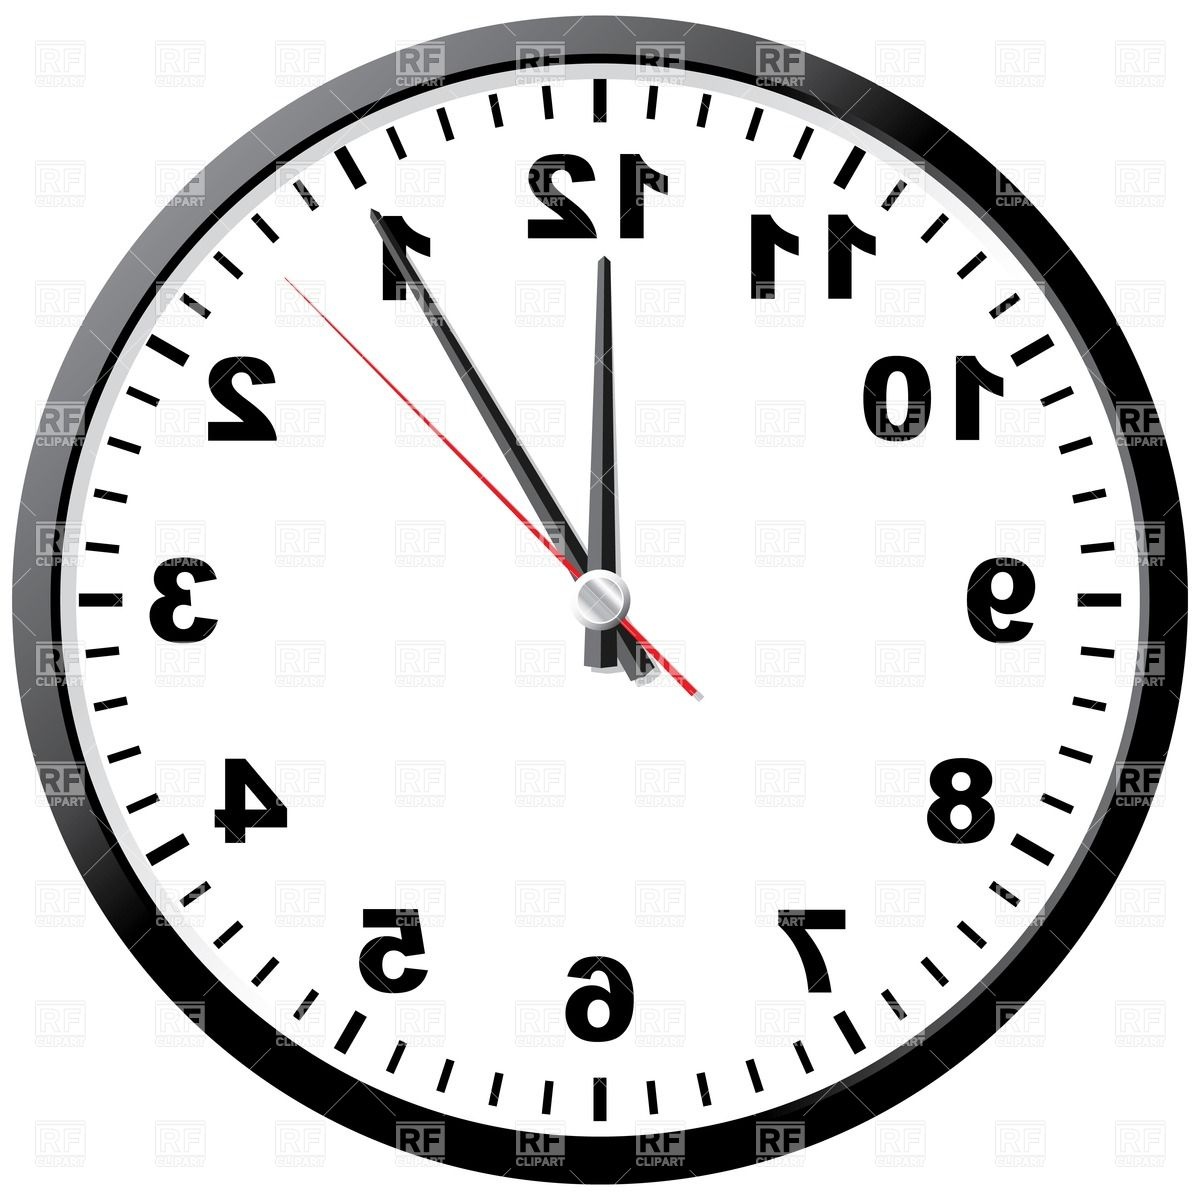 Abstract contrary clock face Vector Image #32655.